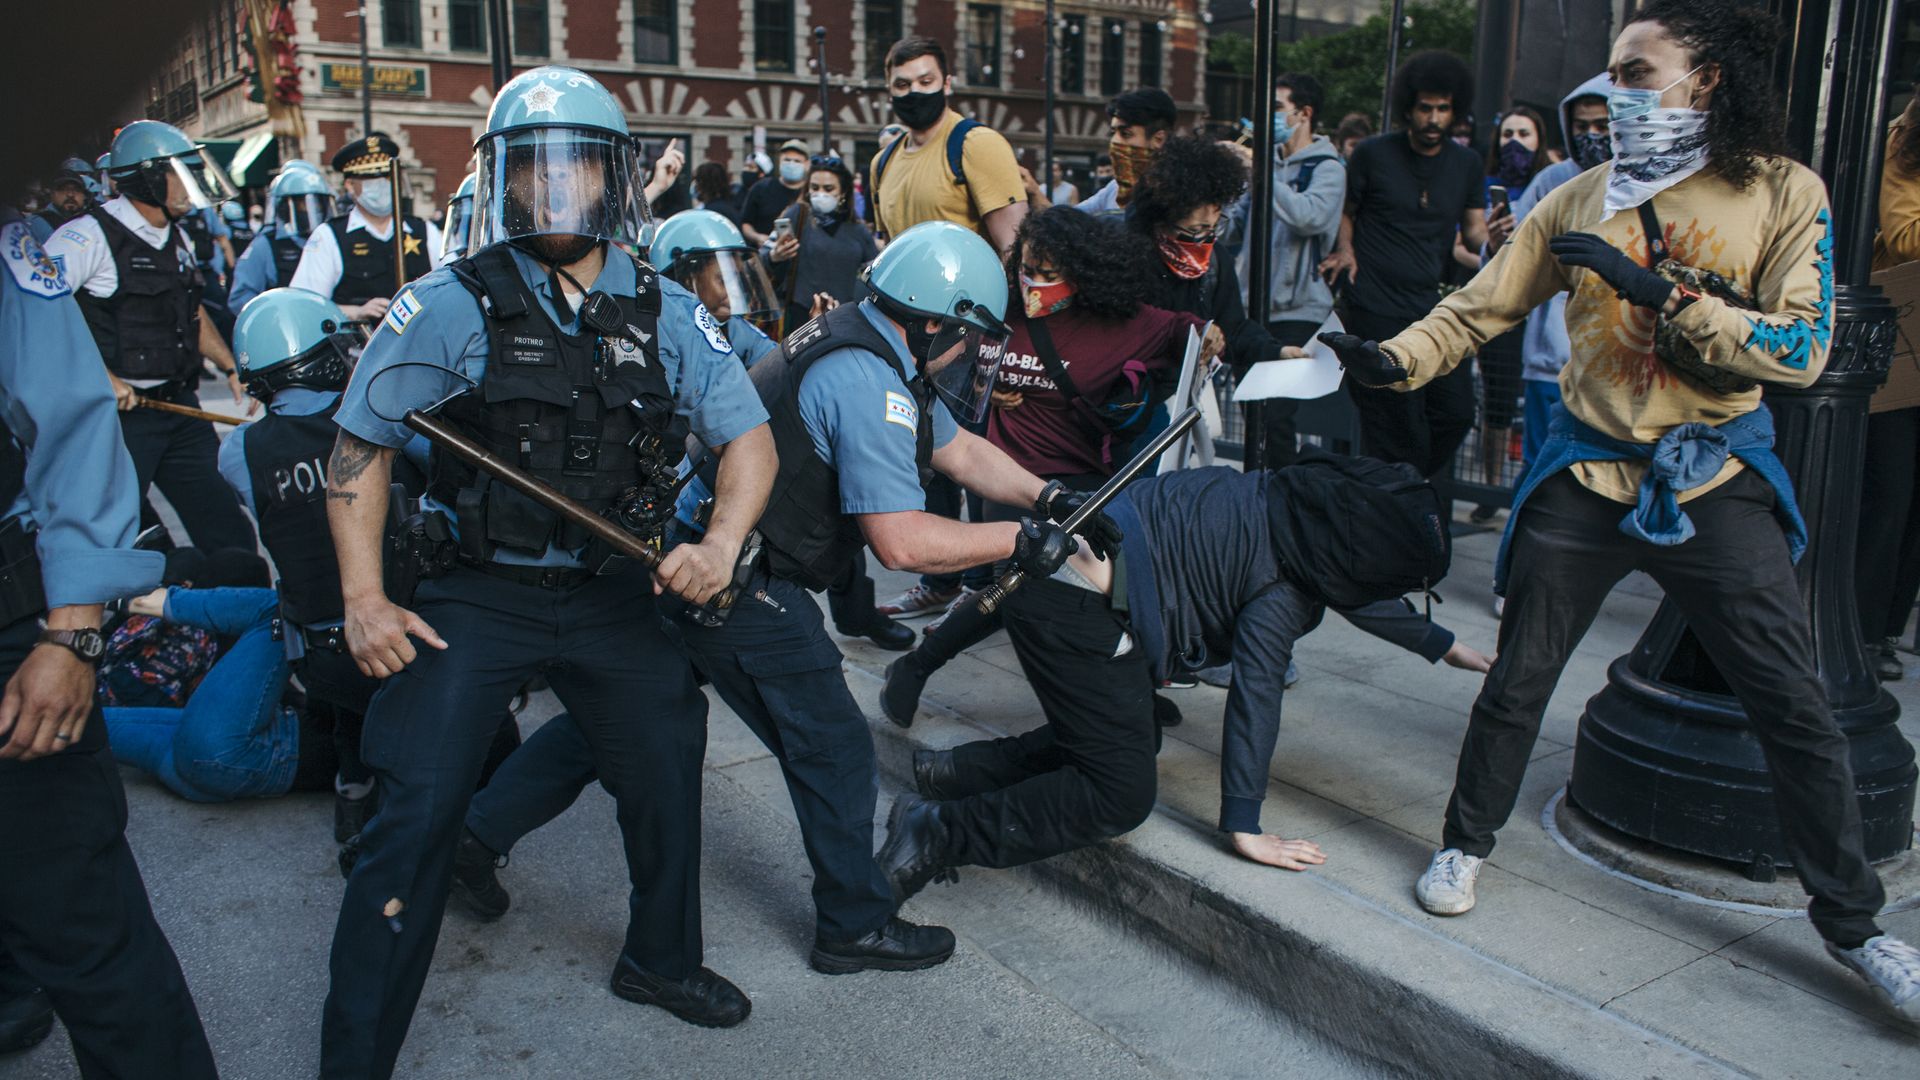 Protesters clash with police in Chicago , on May 30, 2020 (Photo by Jim Vondruska/NurPhoto via Getty Images)